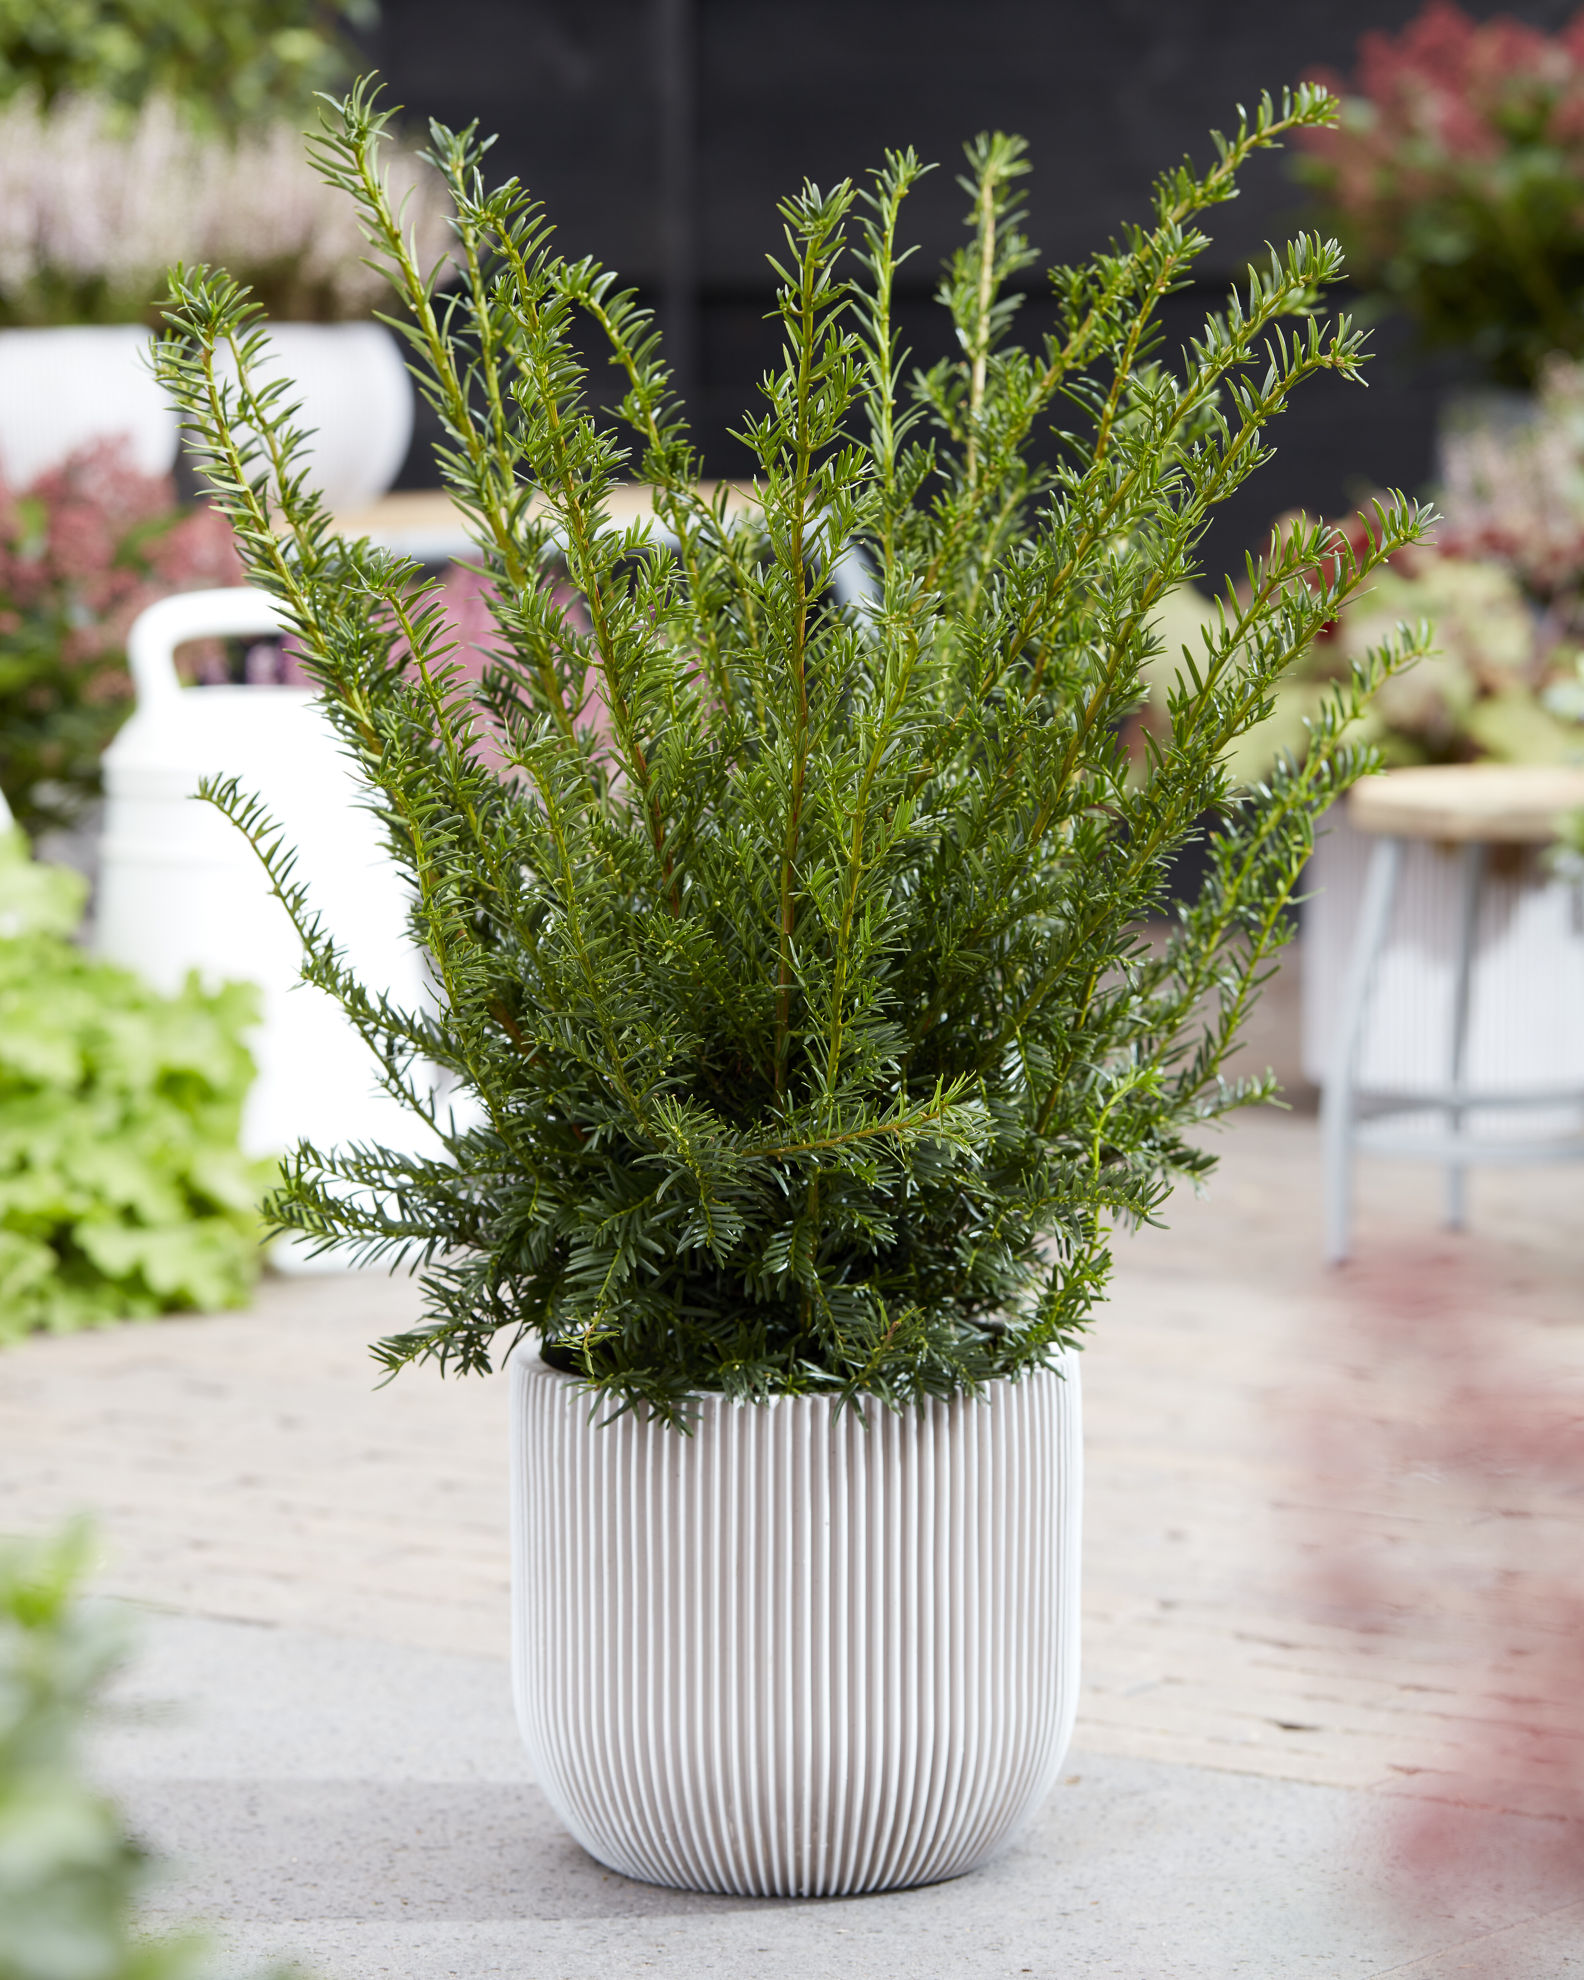 http://www.breederplants.nl/images/thumbs/0002128_taxus.jpeg